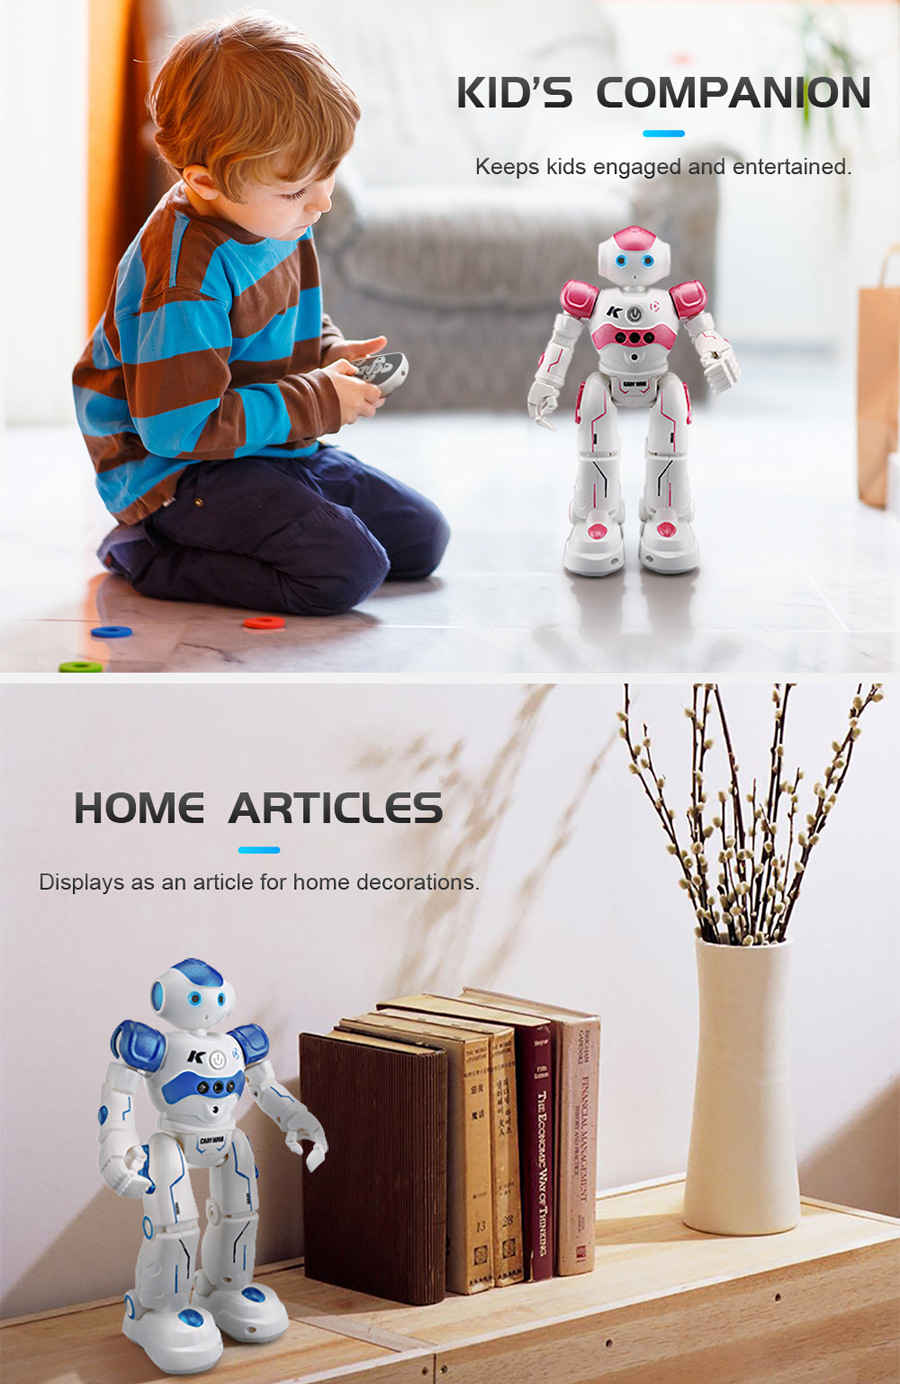 JJRC-R2-Cady-USB-Charging-Dancing-Gesture-Control-Robot-Toy-1181780